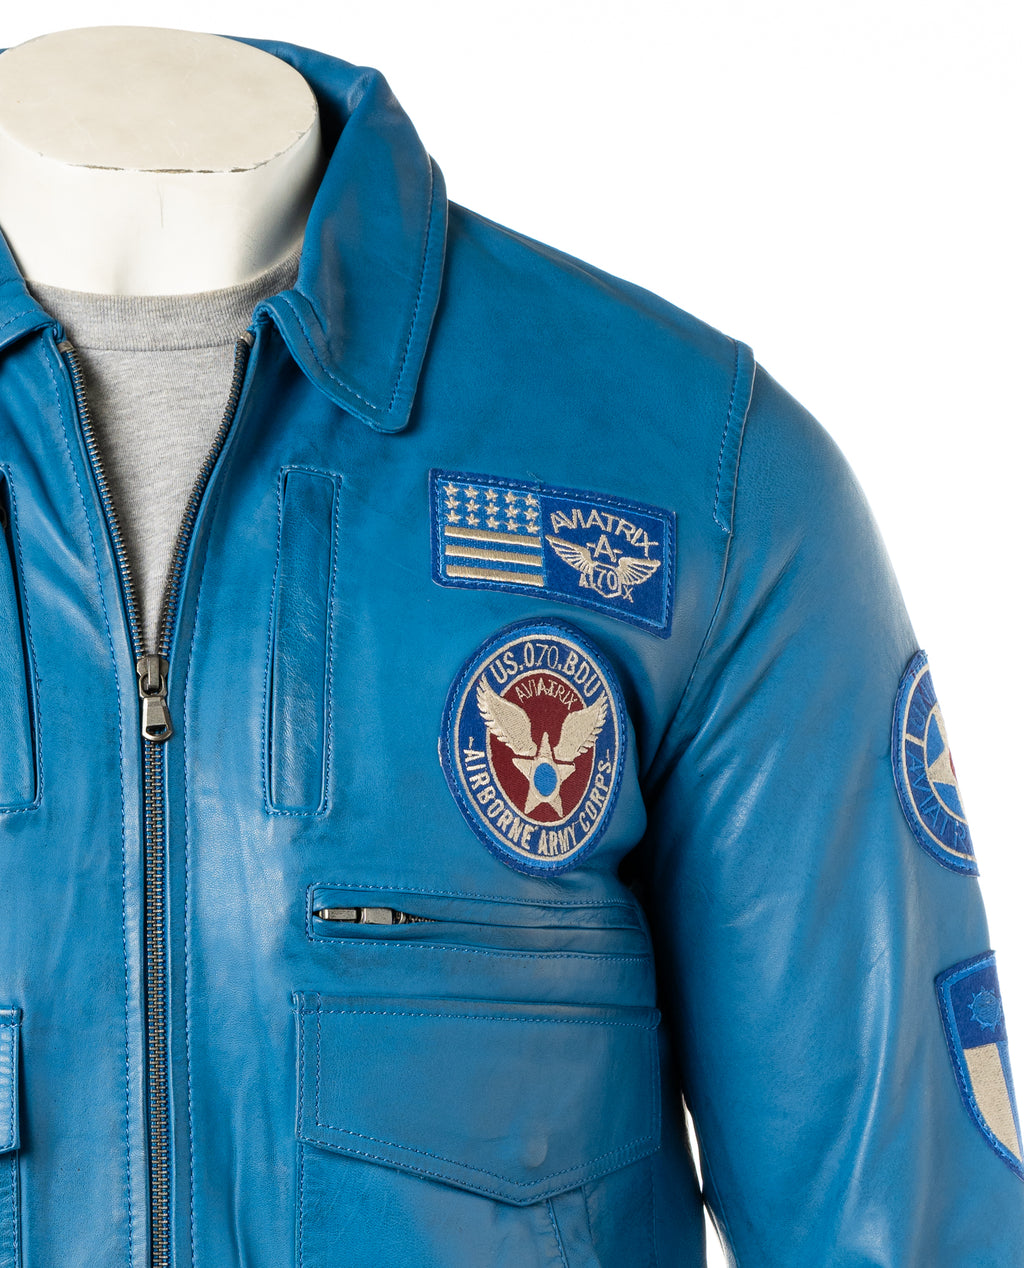 Men's Blue Aviator Pilot Flight A2 Style Leather Jacket With Badge Detail: Riccardo